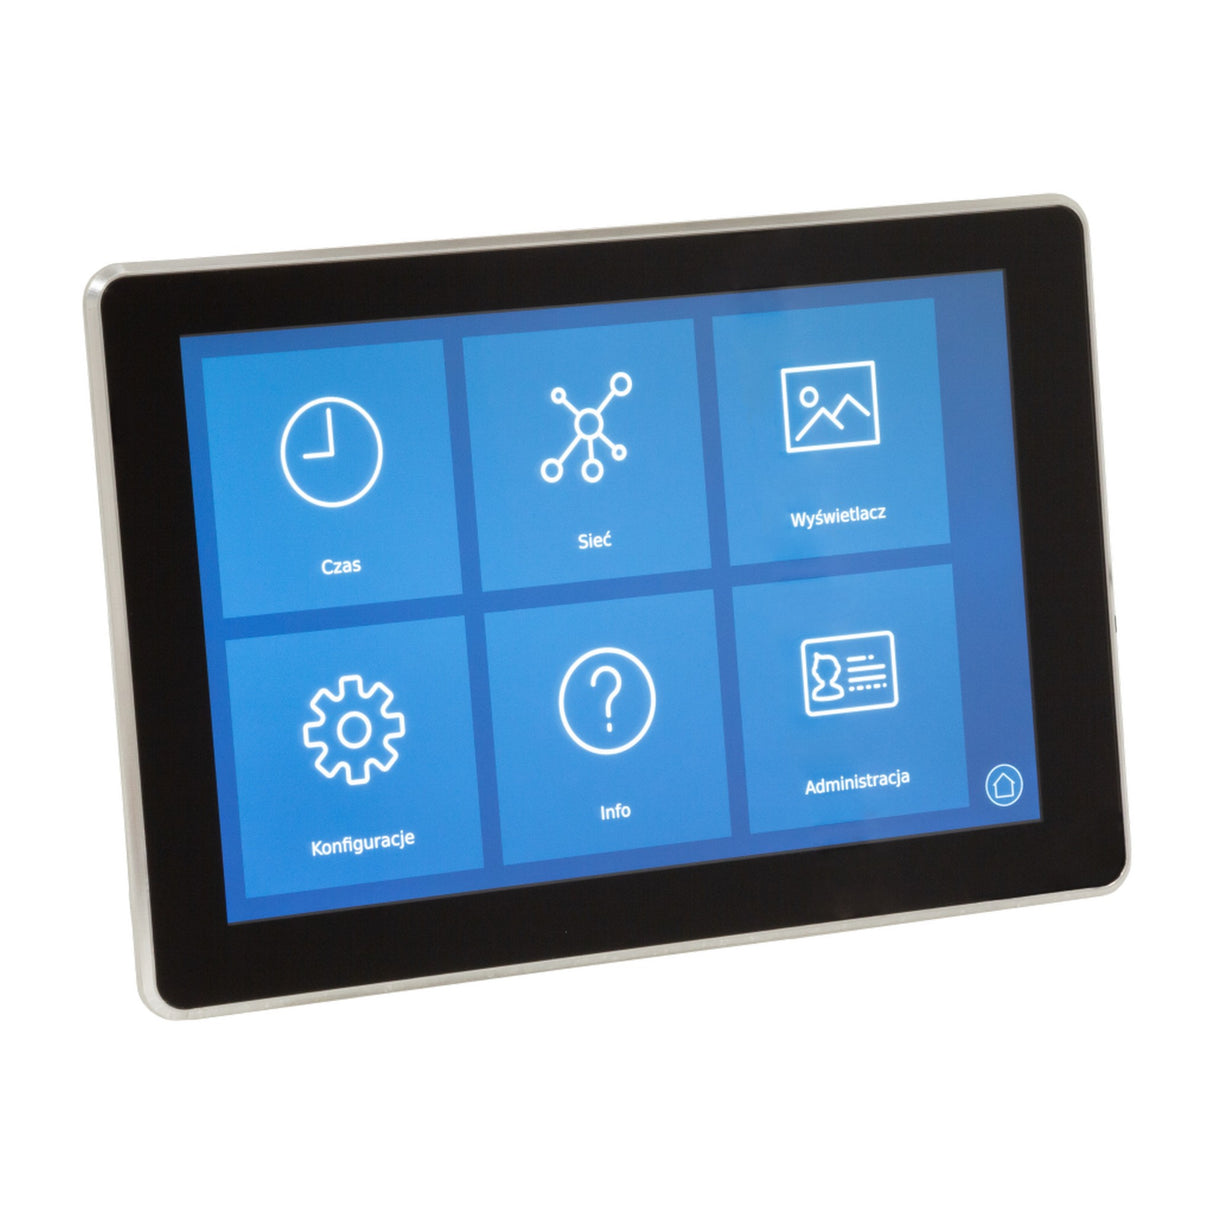 PXM PX703 10-Inch Touchscreen Panel for PX340 and PX710 Controllers